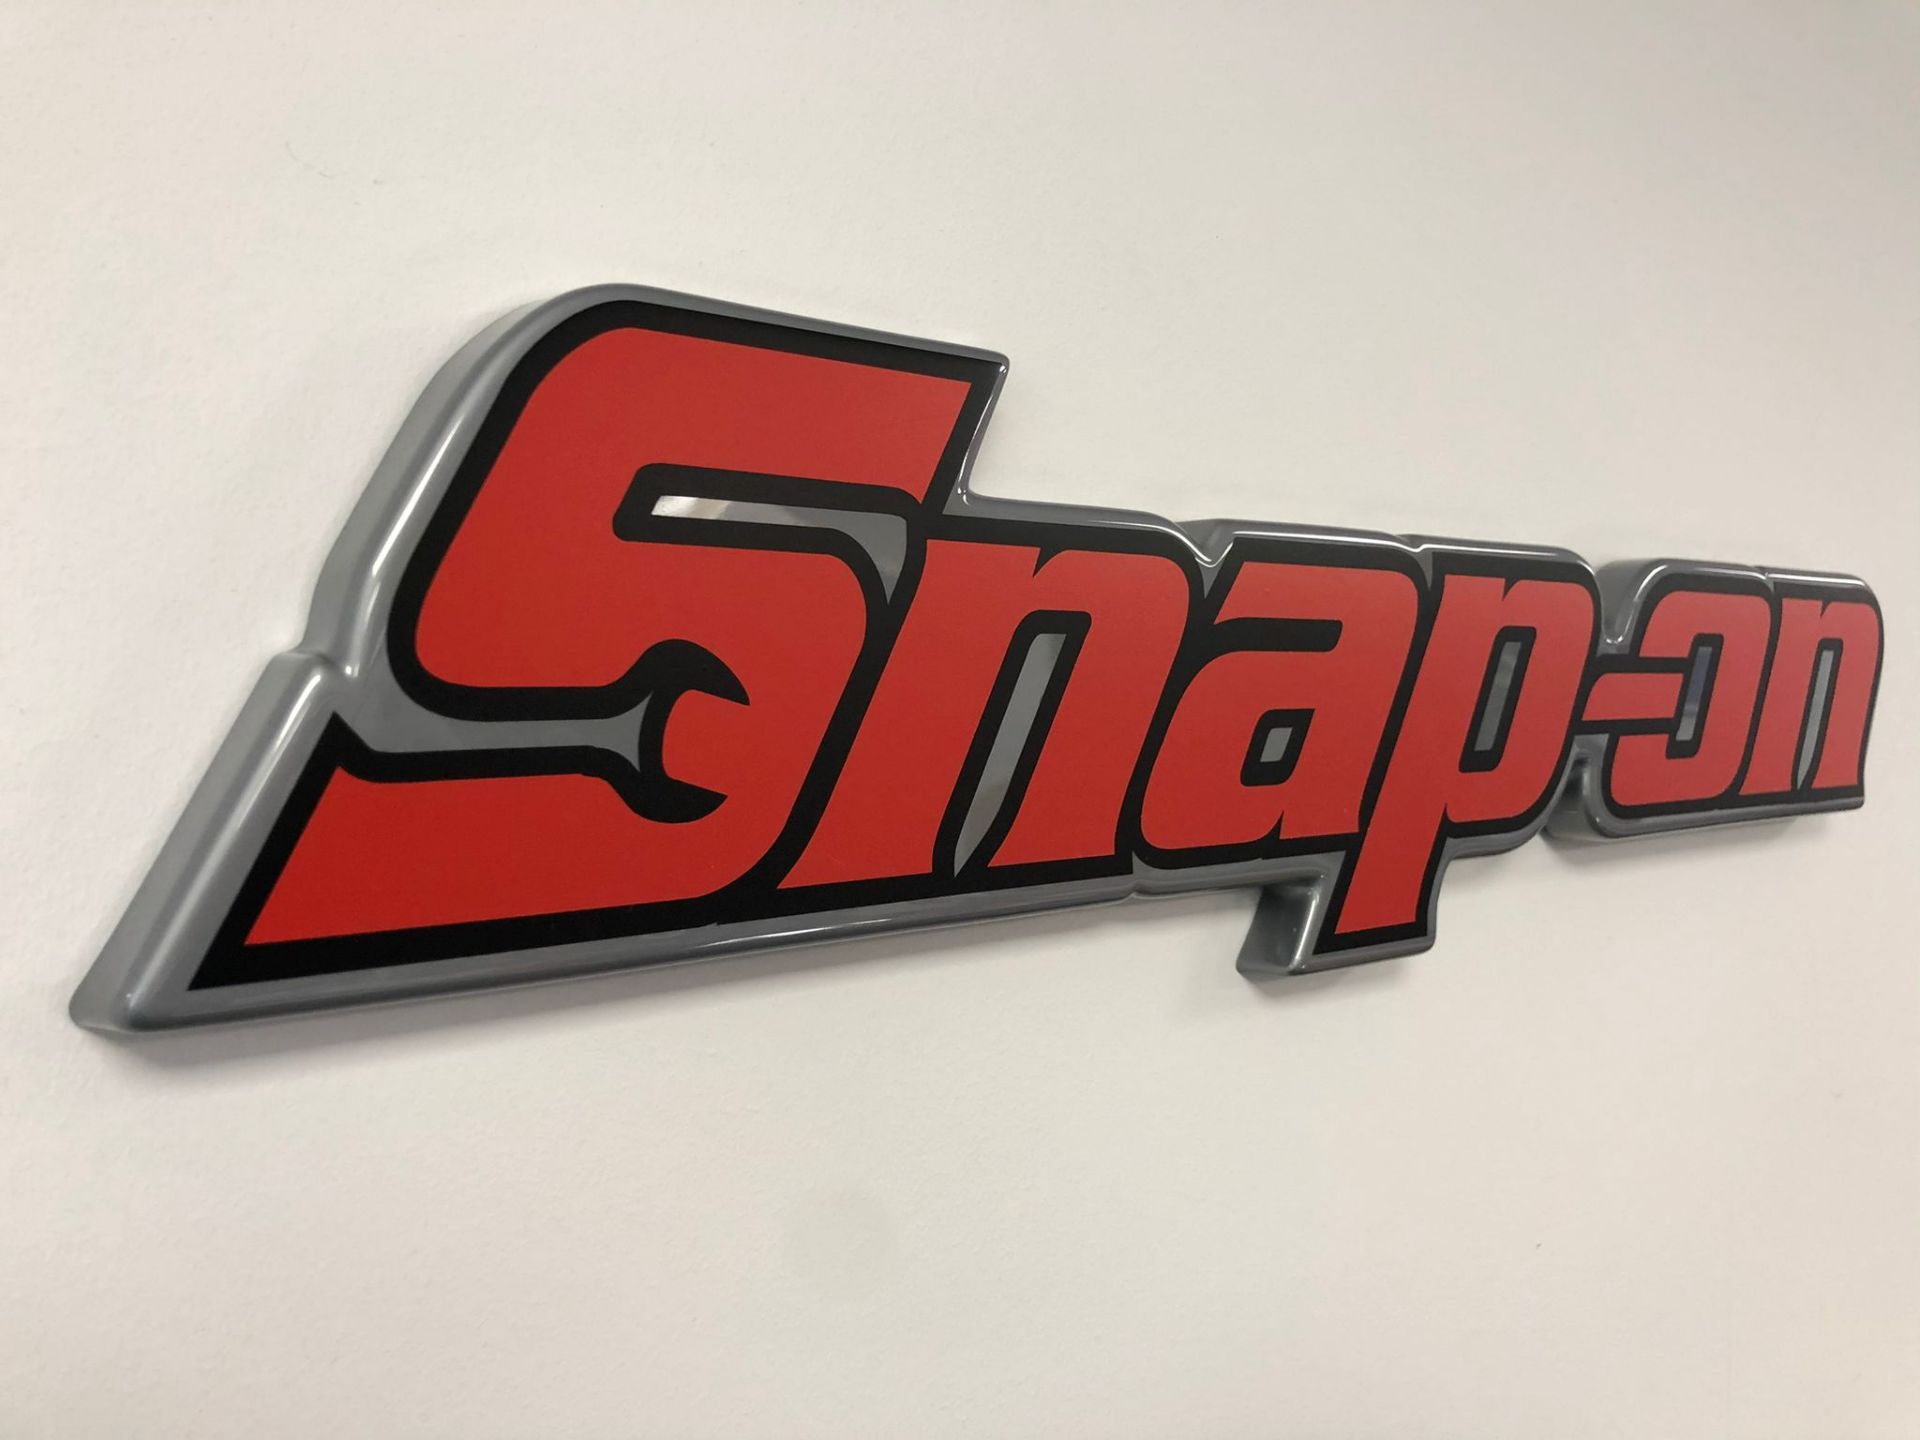 Snap-on sign - Image 2 of 3